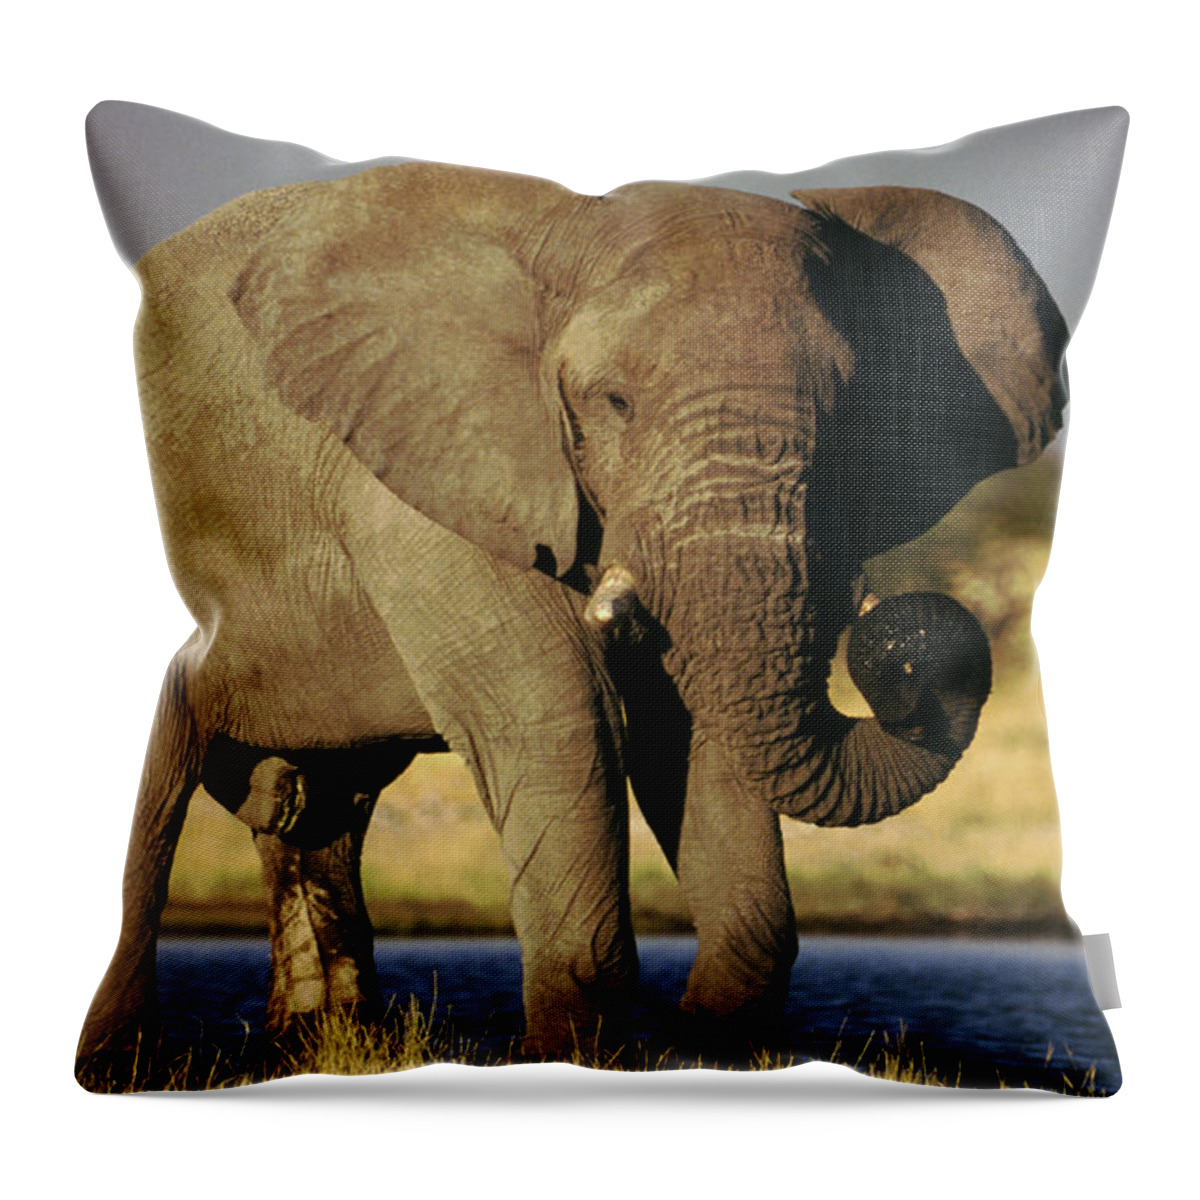 Animal Themes Throw Pillow featuring the photograph African Elephant, Etosha National Park by Gannet77